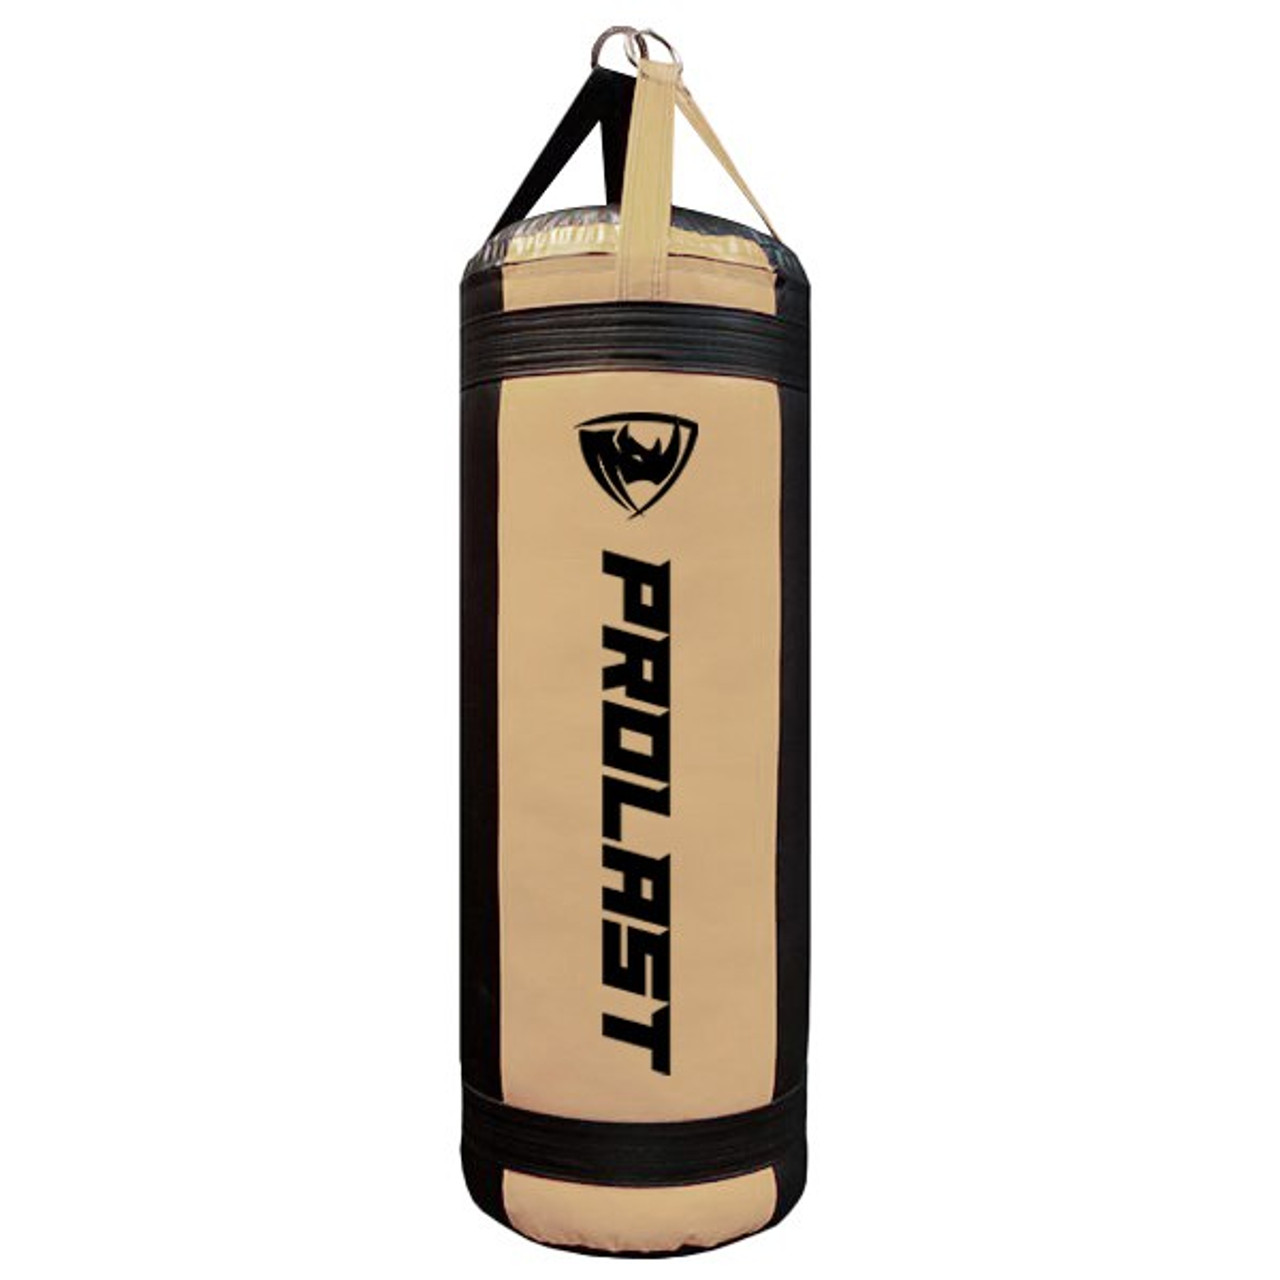 Prolast 4FT XL 135LB Mayweather Style Punching Bag Black // Tan UNFILLED - Made in USA